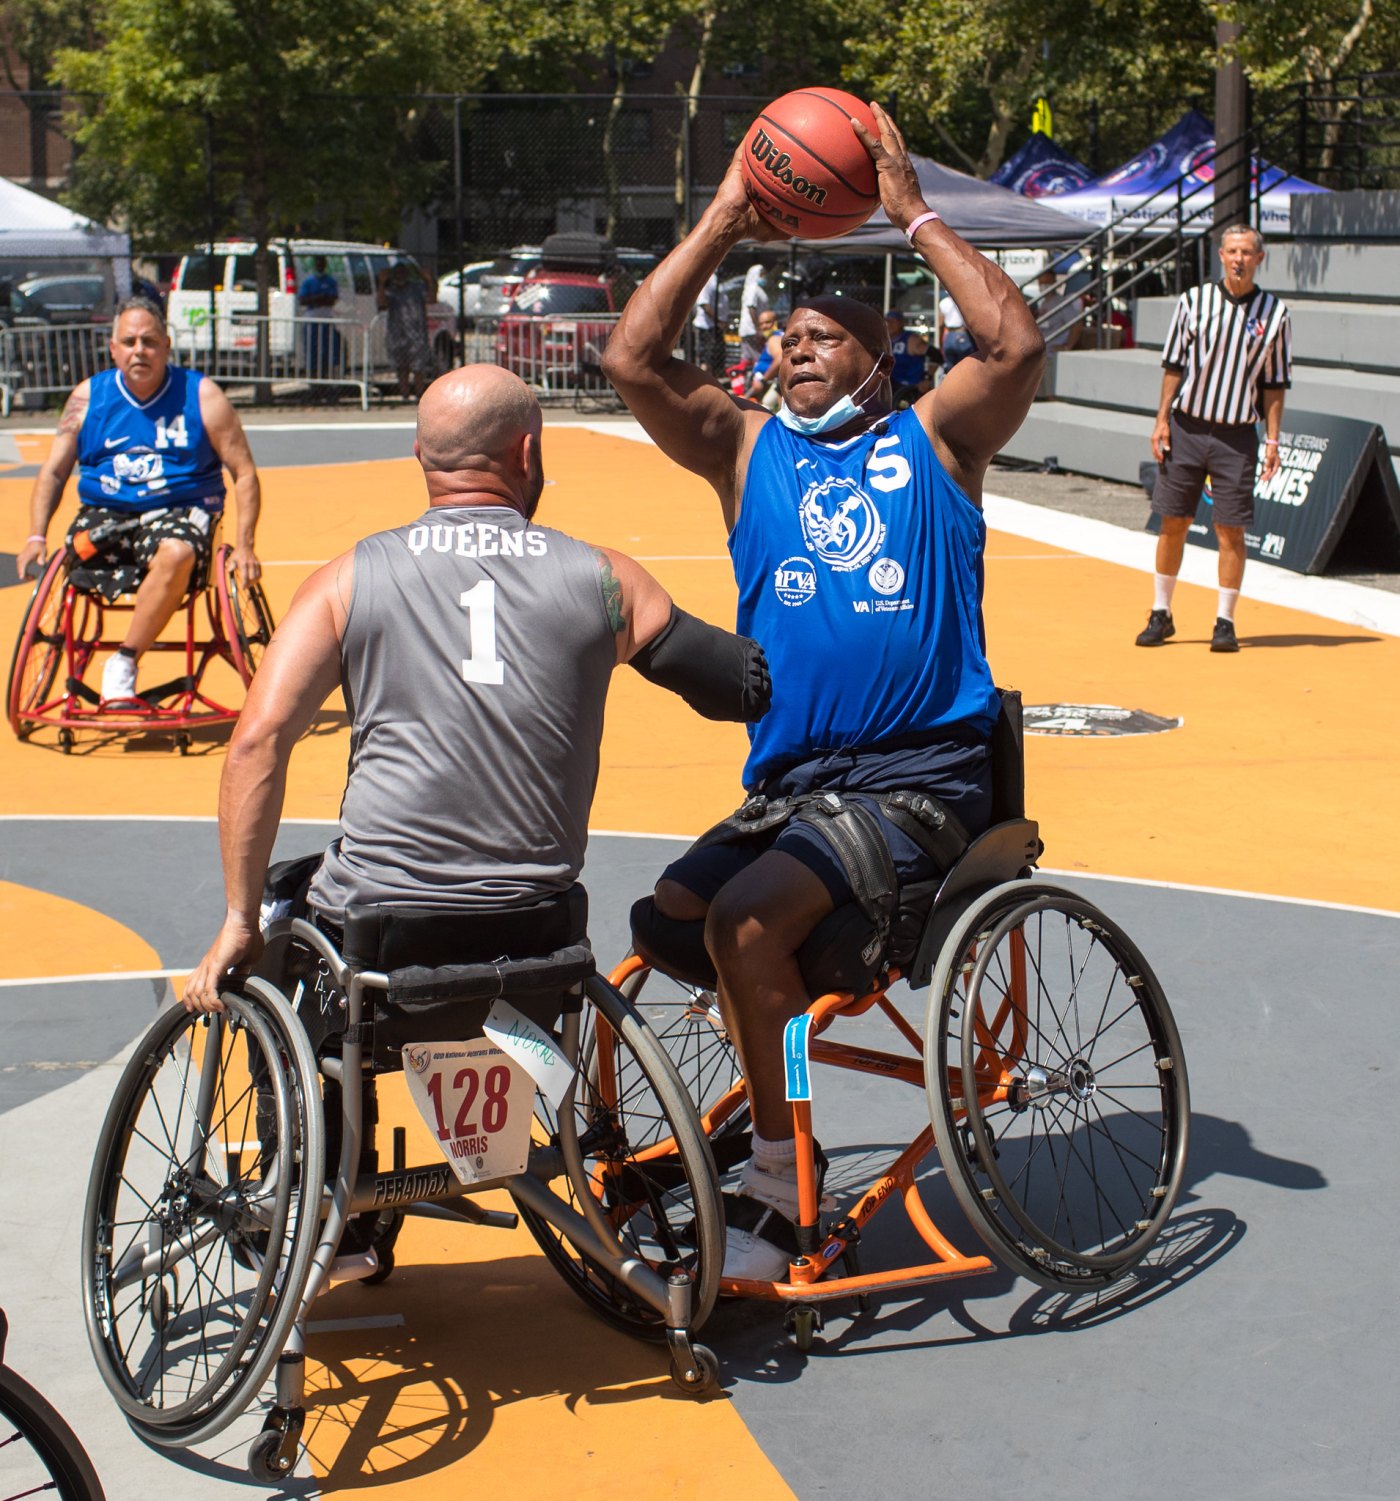 Army Veteran Roy Wilkins (5), a former college basketball player, won a bronze medal in basketball at the 40th National Veterans Wheelchair Games.